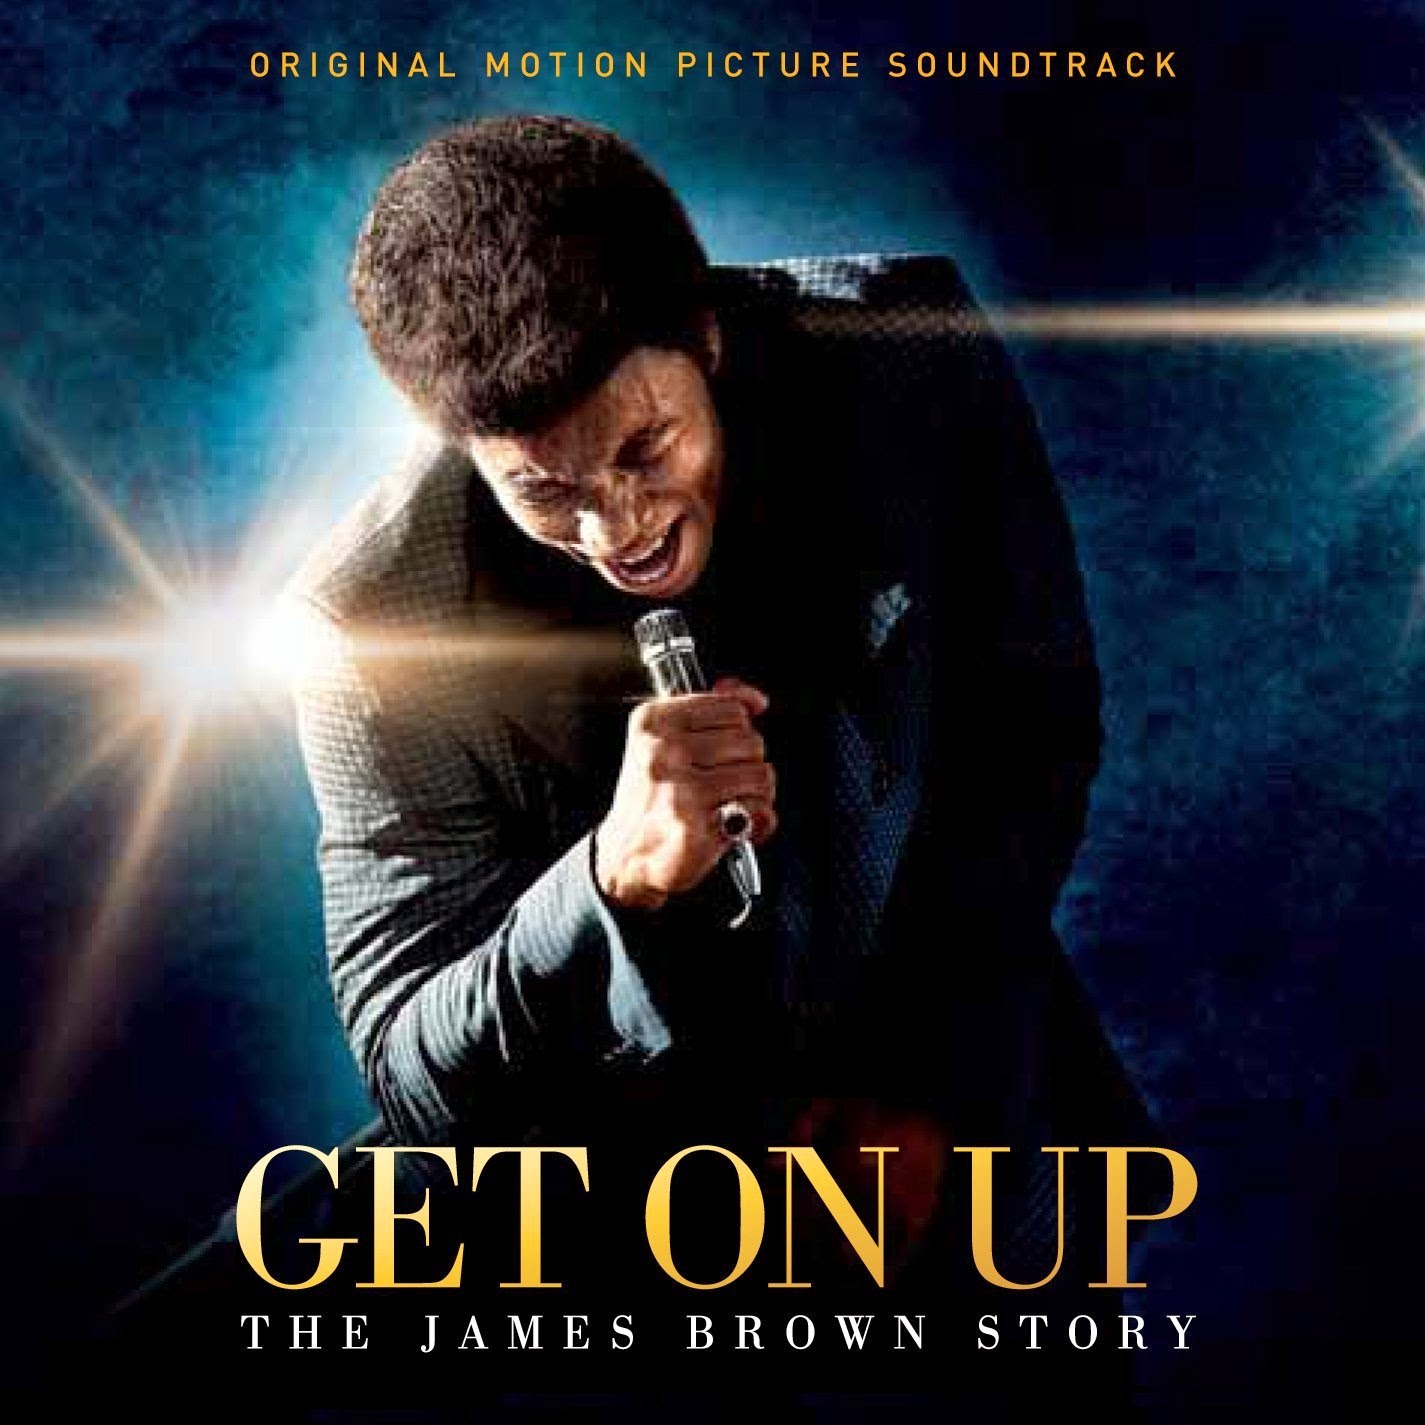 Get on Up film - Wikipedia